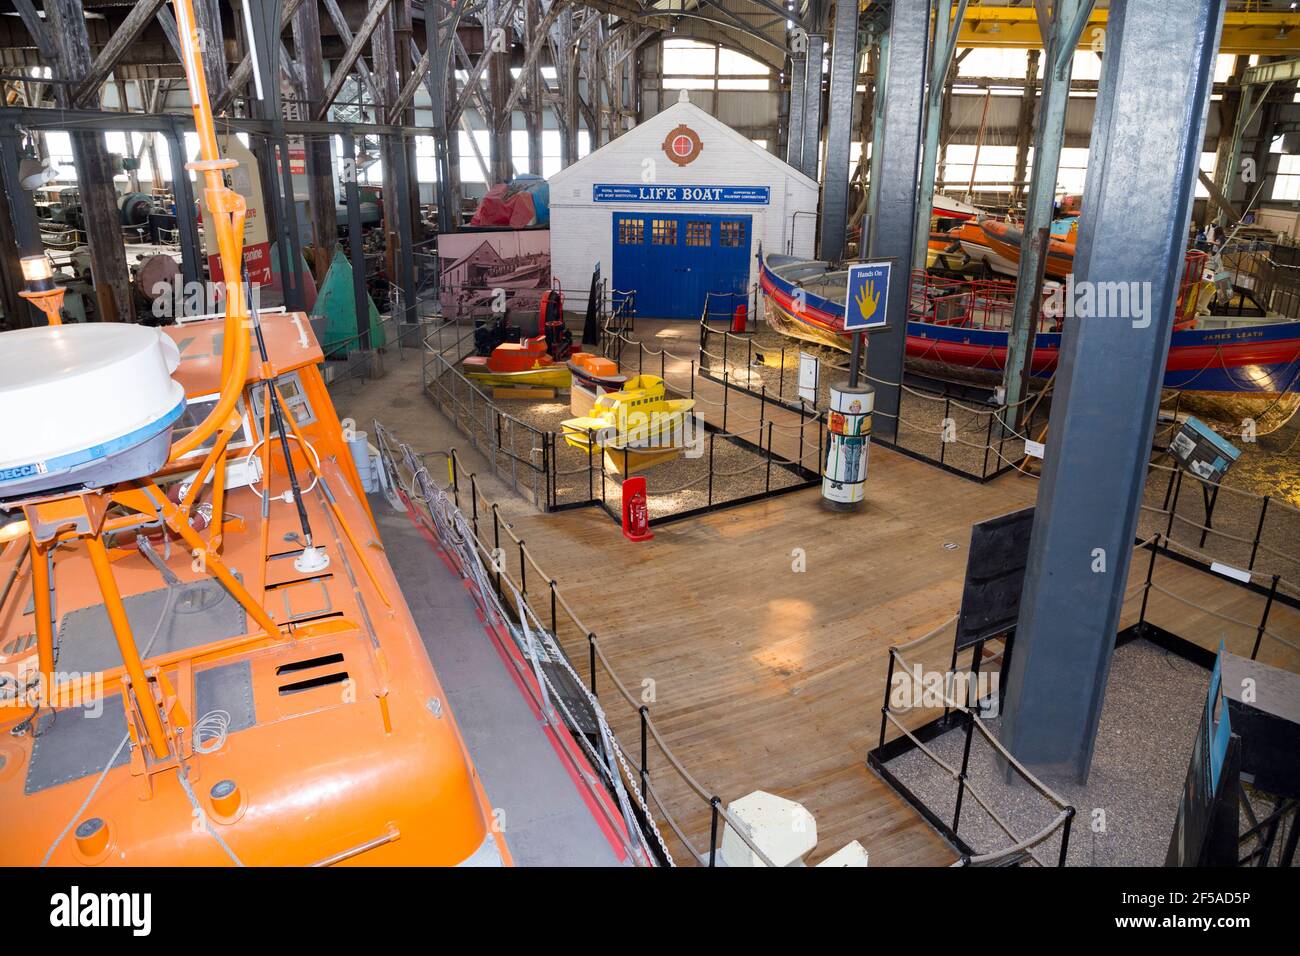 Old vintage historic RNLI Lifeboat on display at Number Four Boat House / Boathouse Number 4 at Historic Dockyard / Dockyards Chatham in Kent. UK (121) Stock Photo